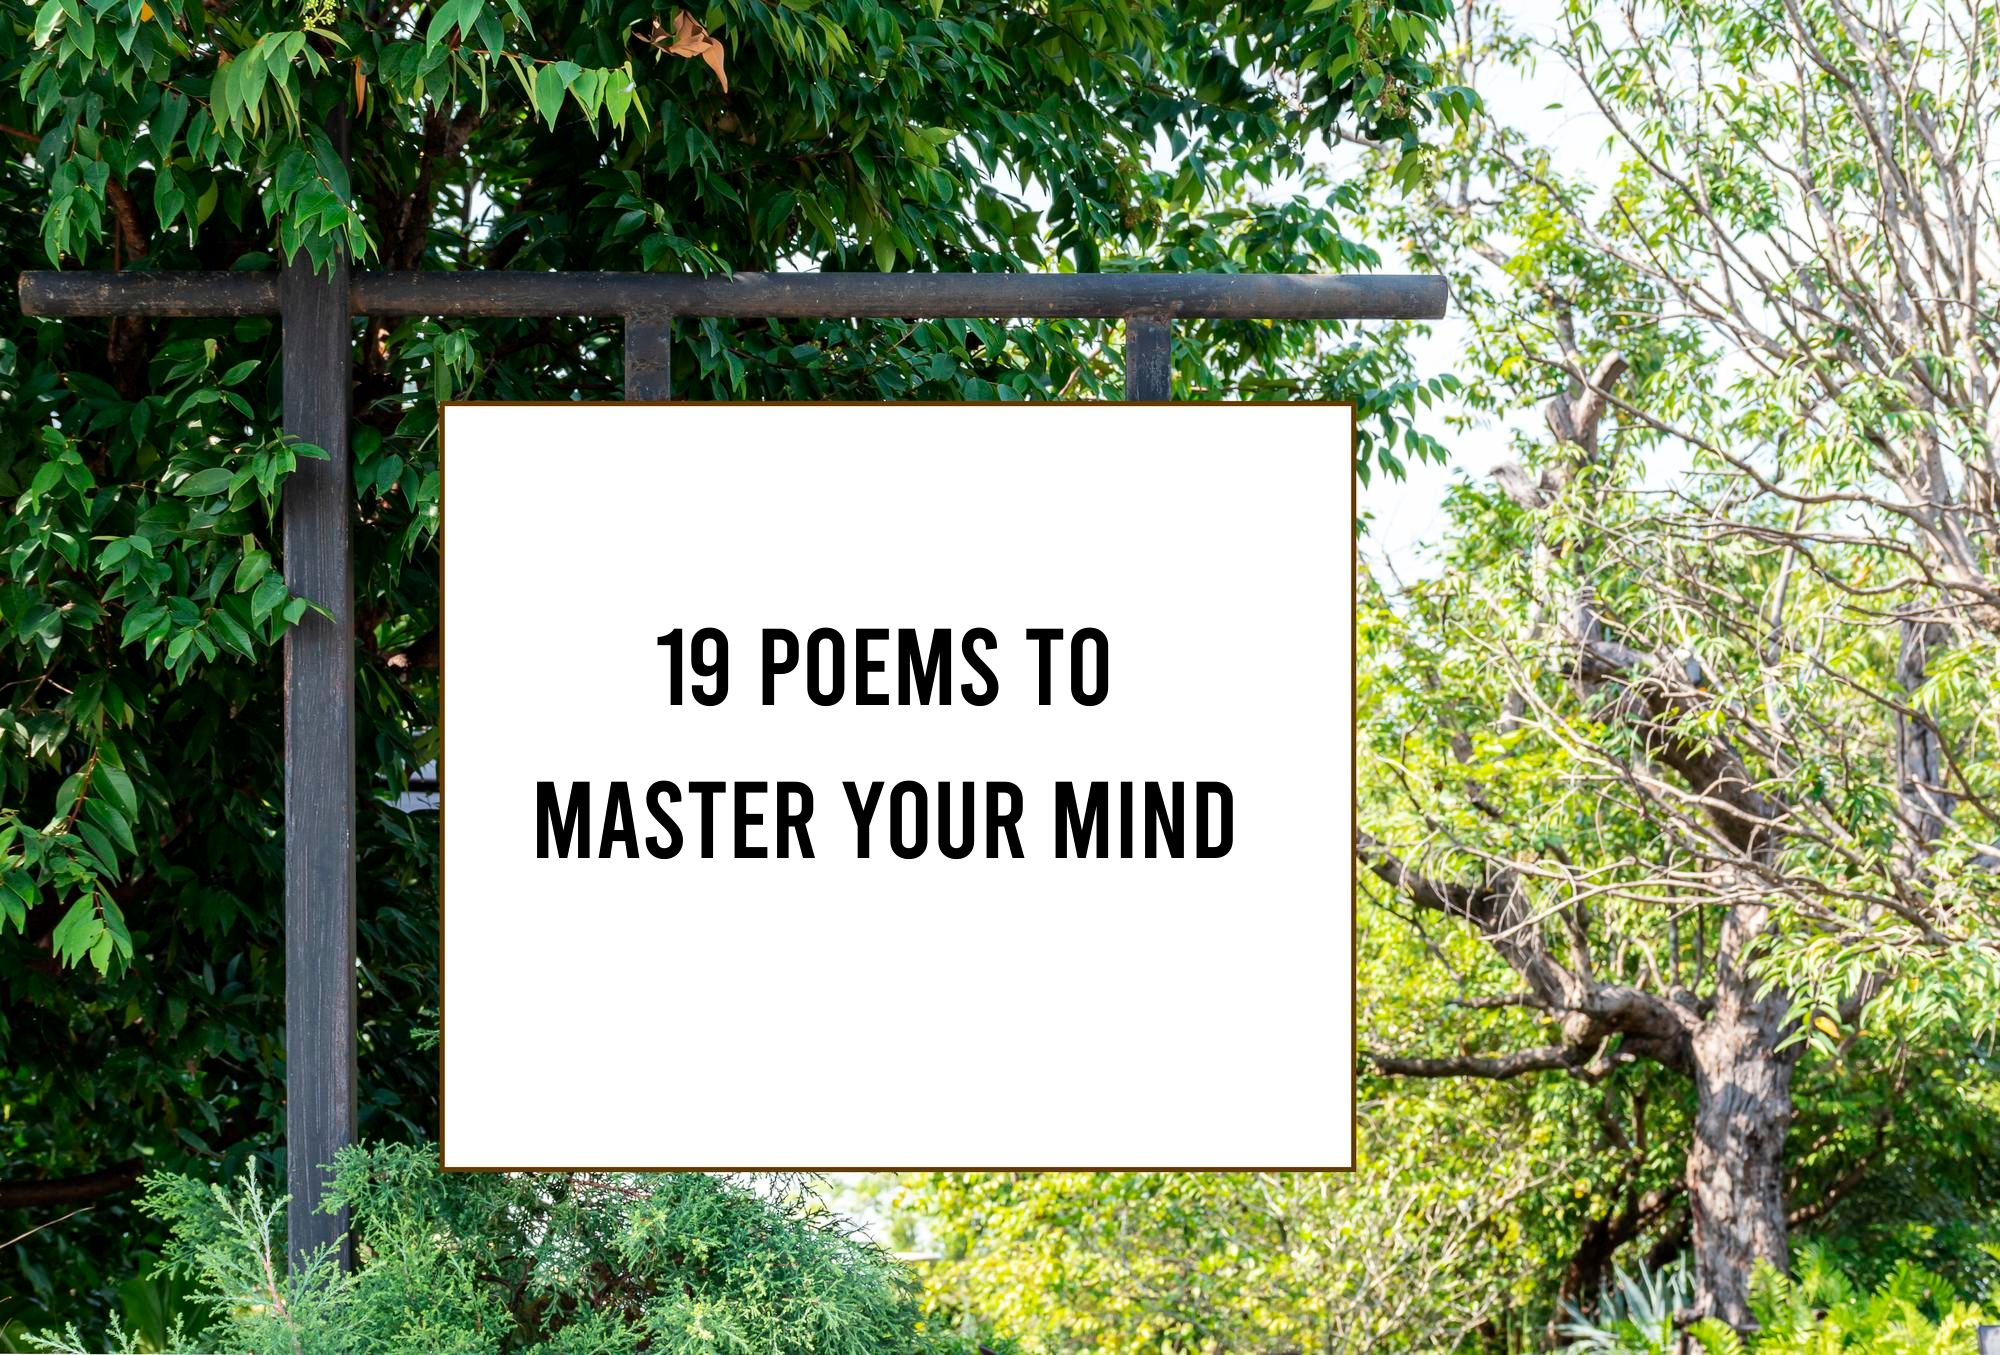 19 poems to master your mind